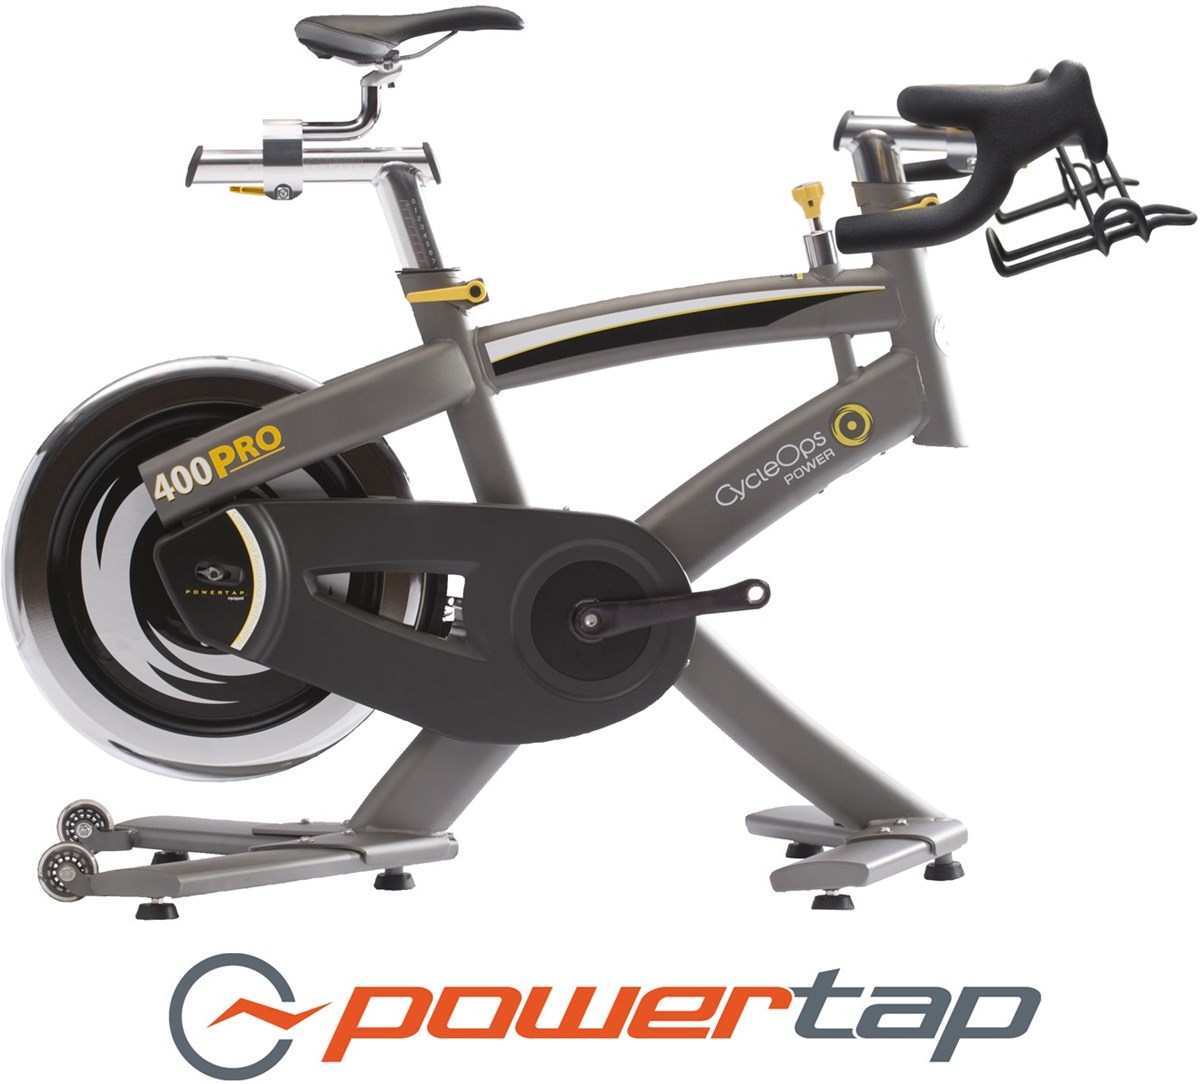 CycleOps Indoor Cycle i400 Pro with Powertap (CVT Ready) product image